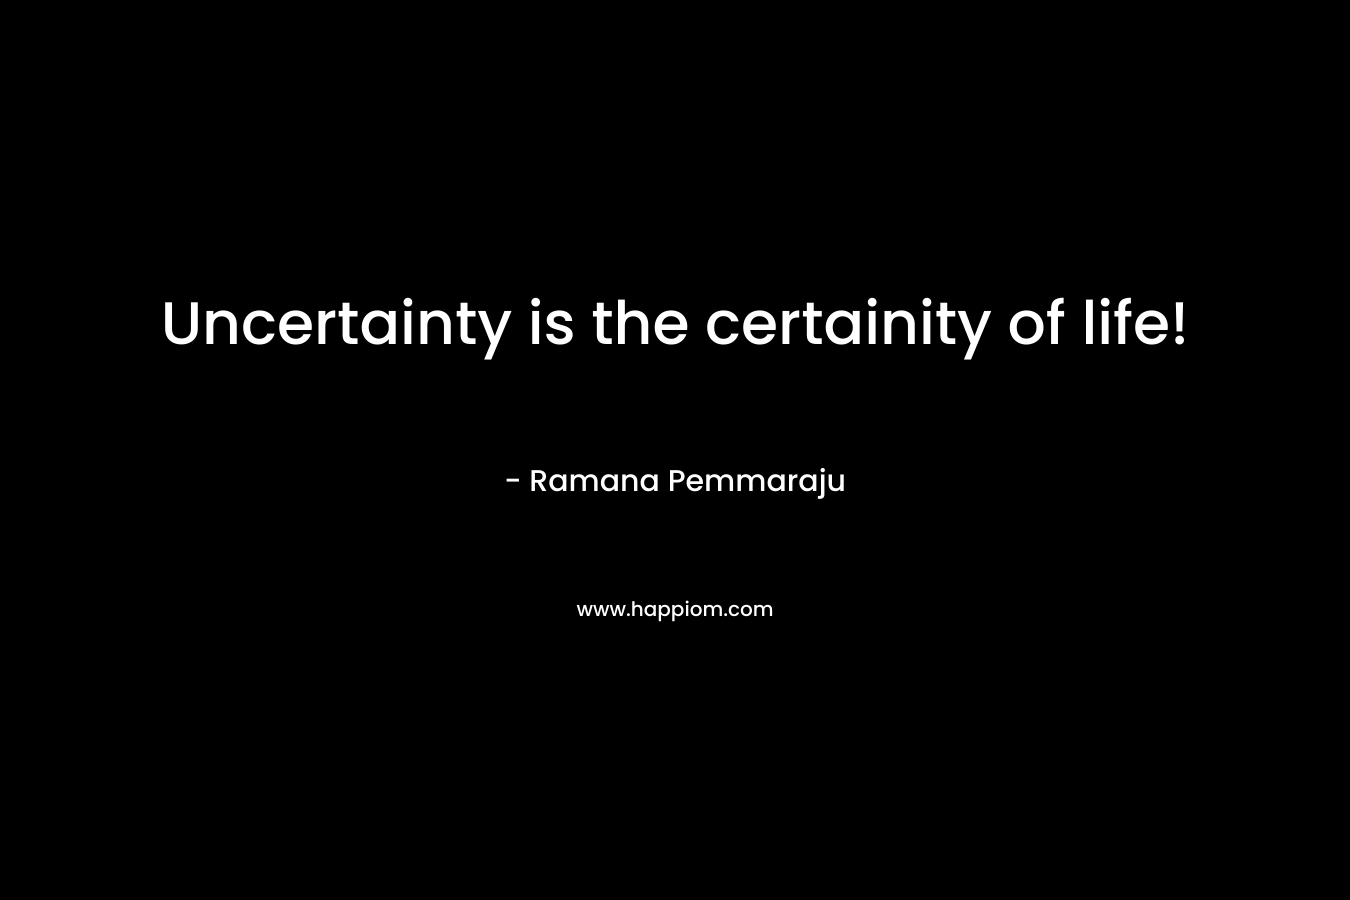 Uncertainty is the certainity of life!